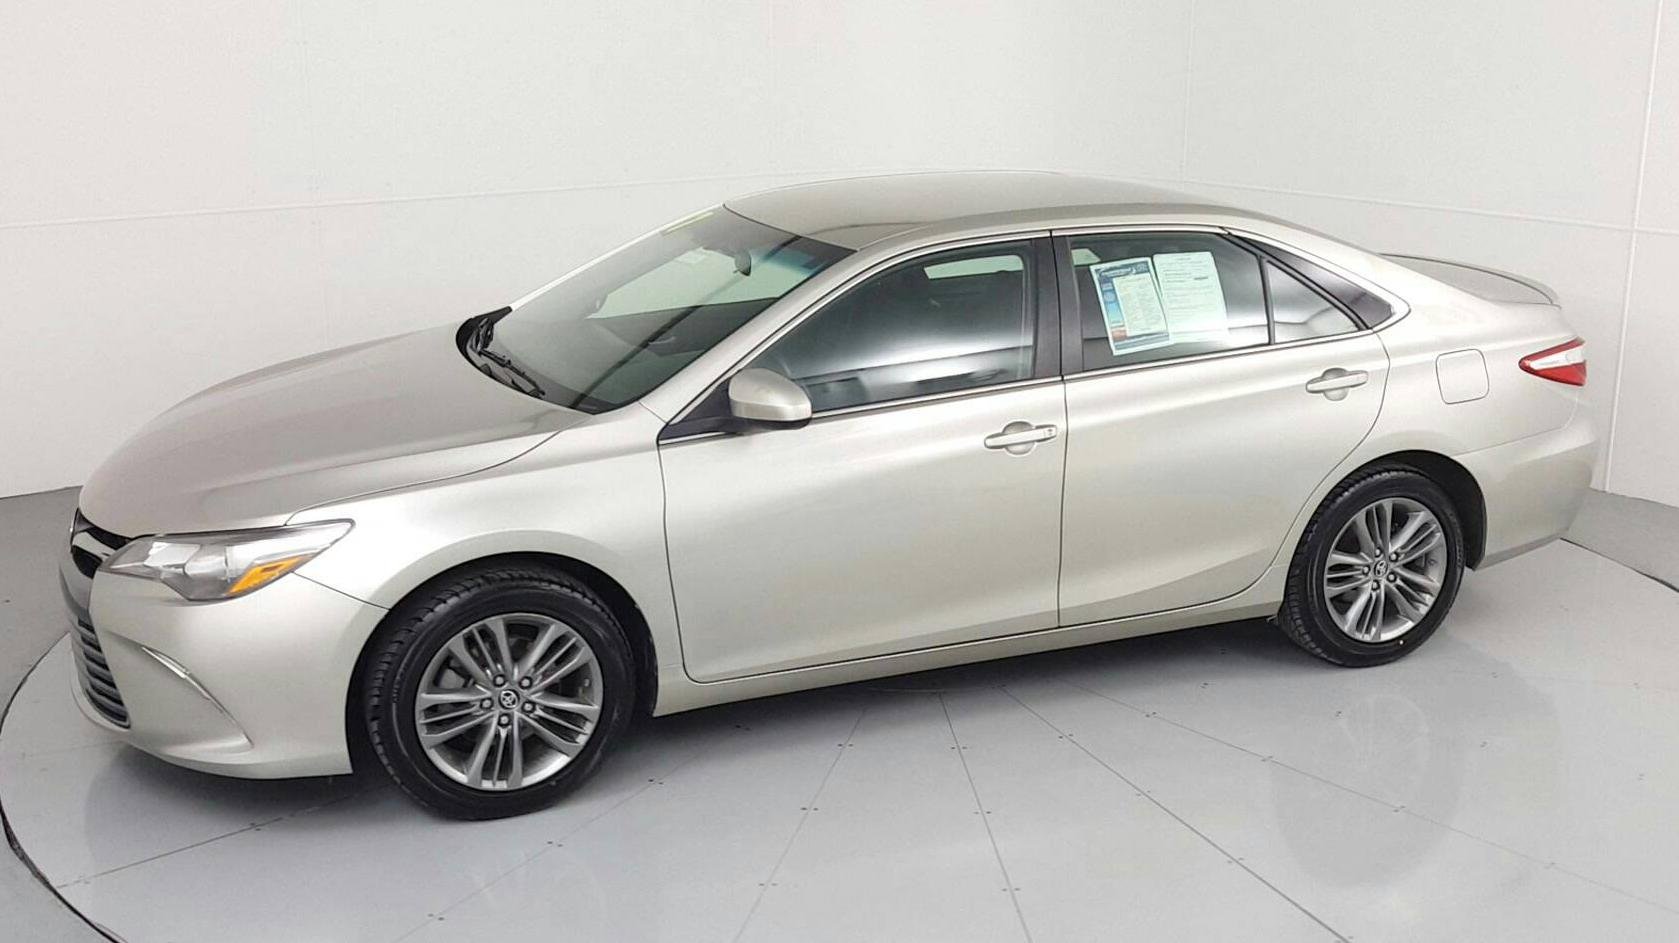 Pre-Owned 2017 TOYOTA Camry SE 4-door Mid-Size Passenger Car in ...